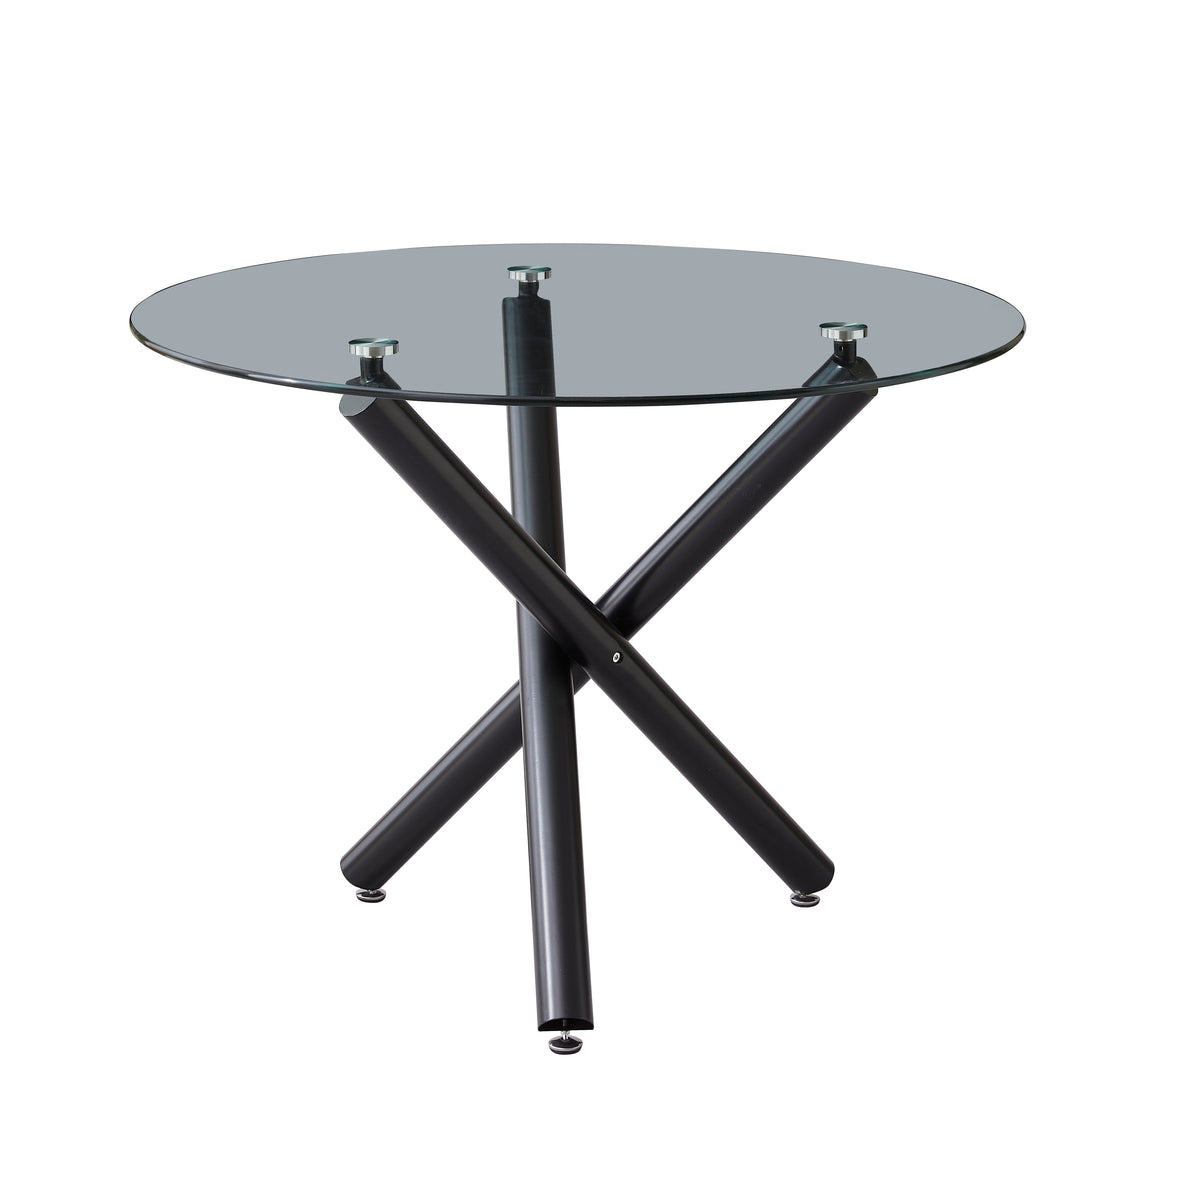 The Velets Luna Round Glass Top Dining Table with Black Sturdy Metal legs